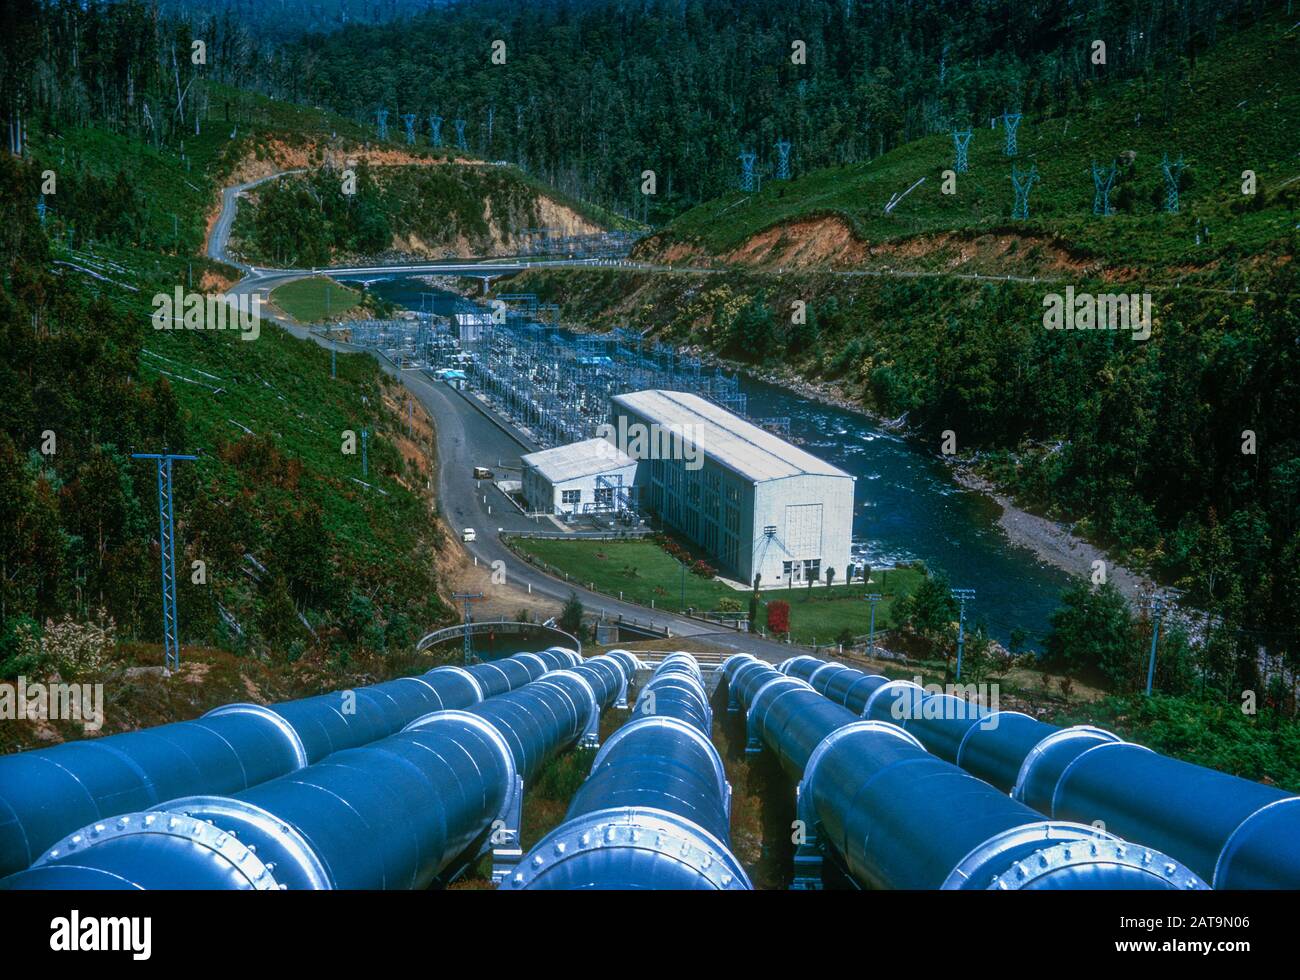 Hydro power station at Tungatinah, Tasmania, Ausralia in 1964.  In the post-war years, hydro electric power generation was then seen as key to Tasmania's futue development and prosperity. Stock Photo